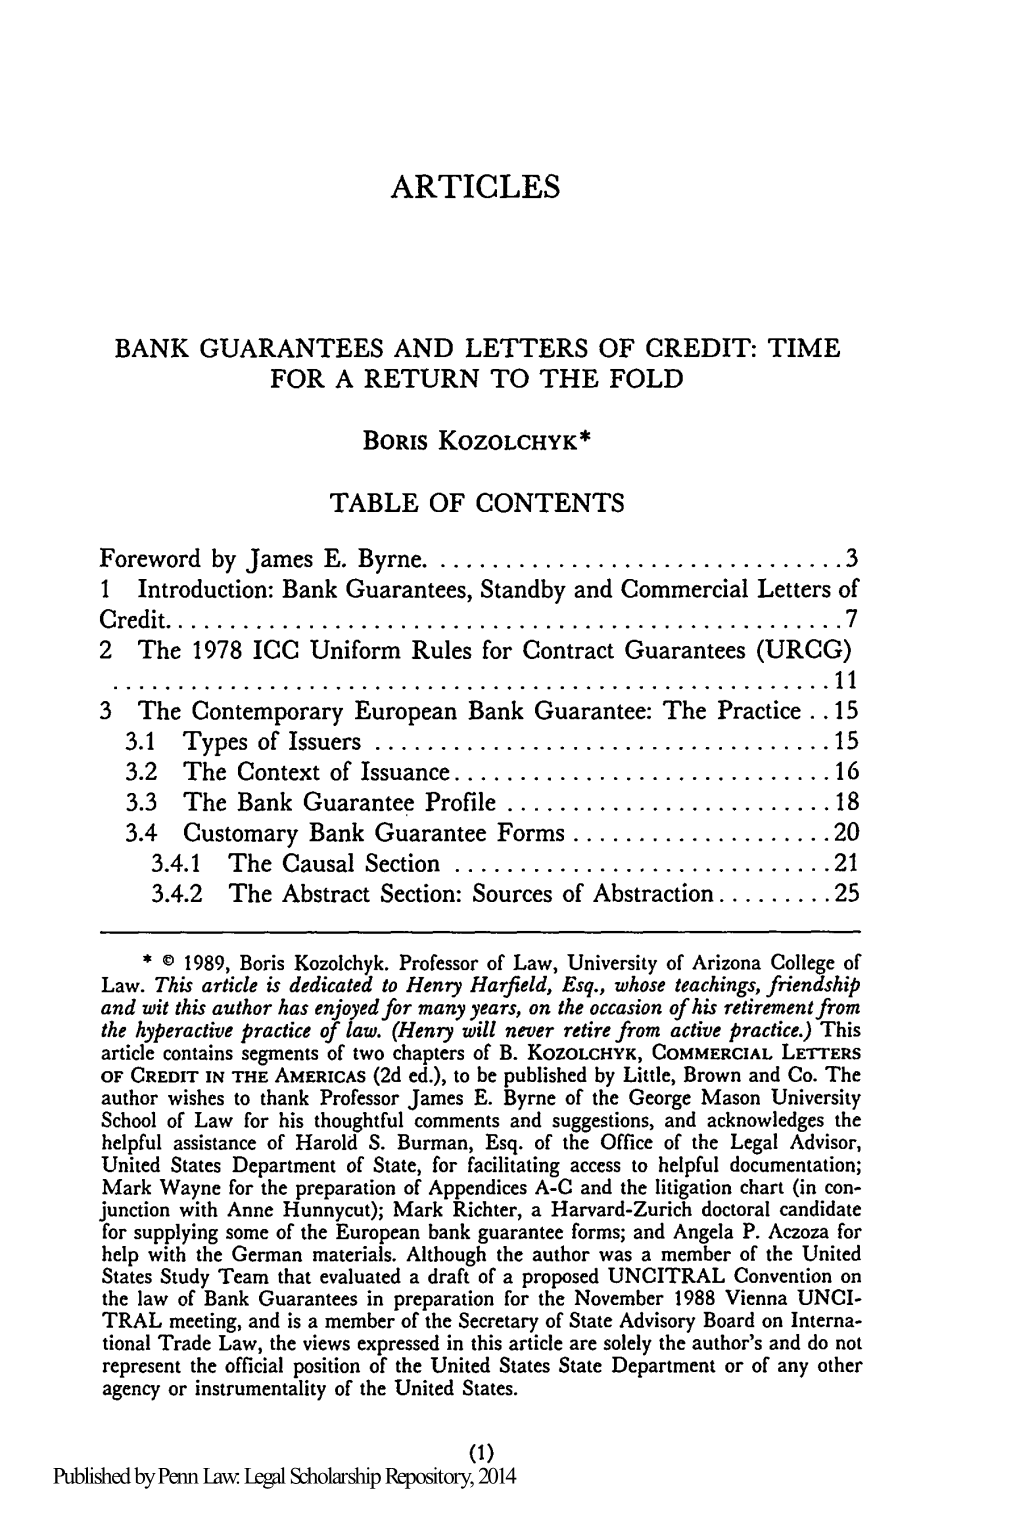 Bank Guarantees and Letters of Credit: Time for a Return to the Fold